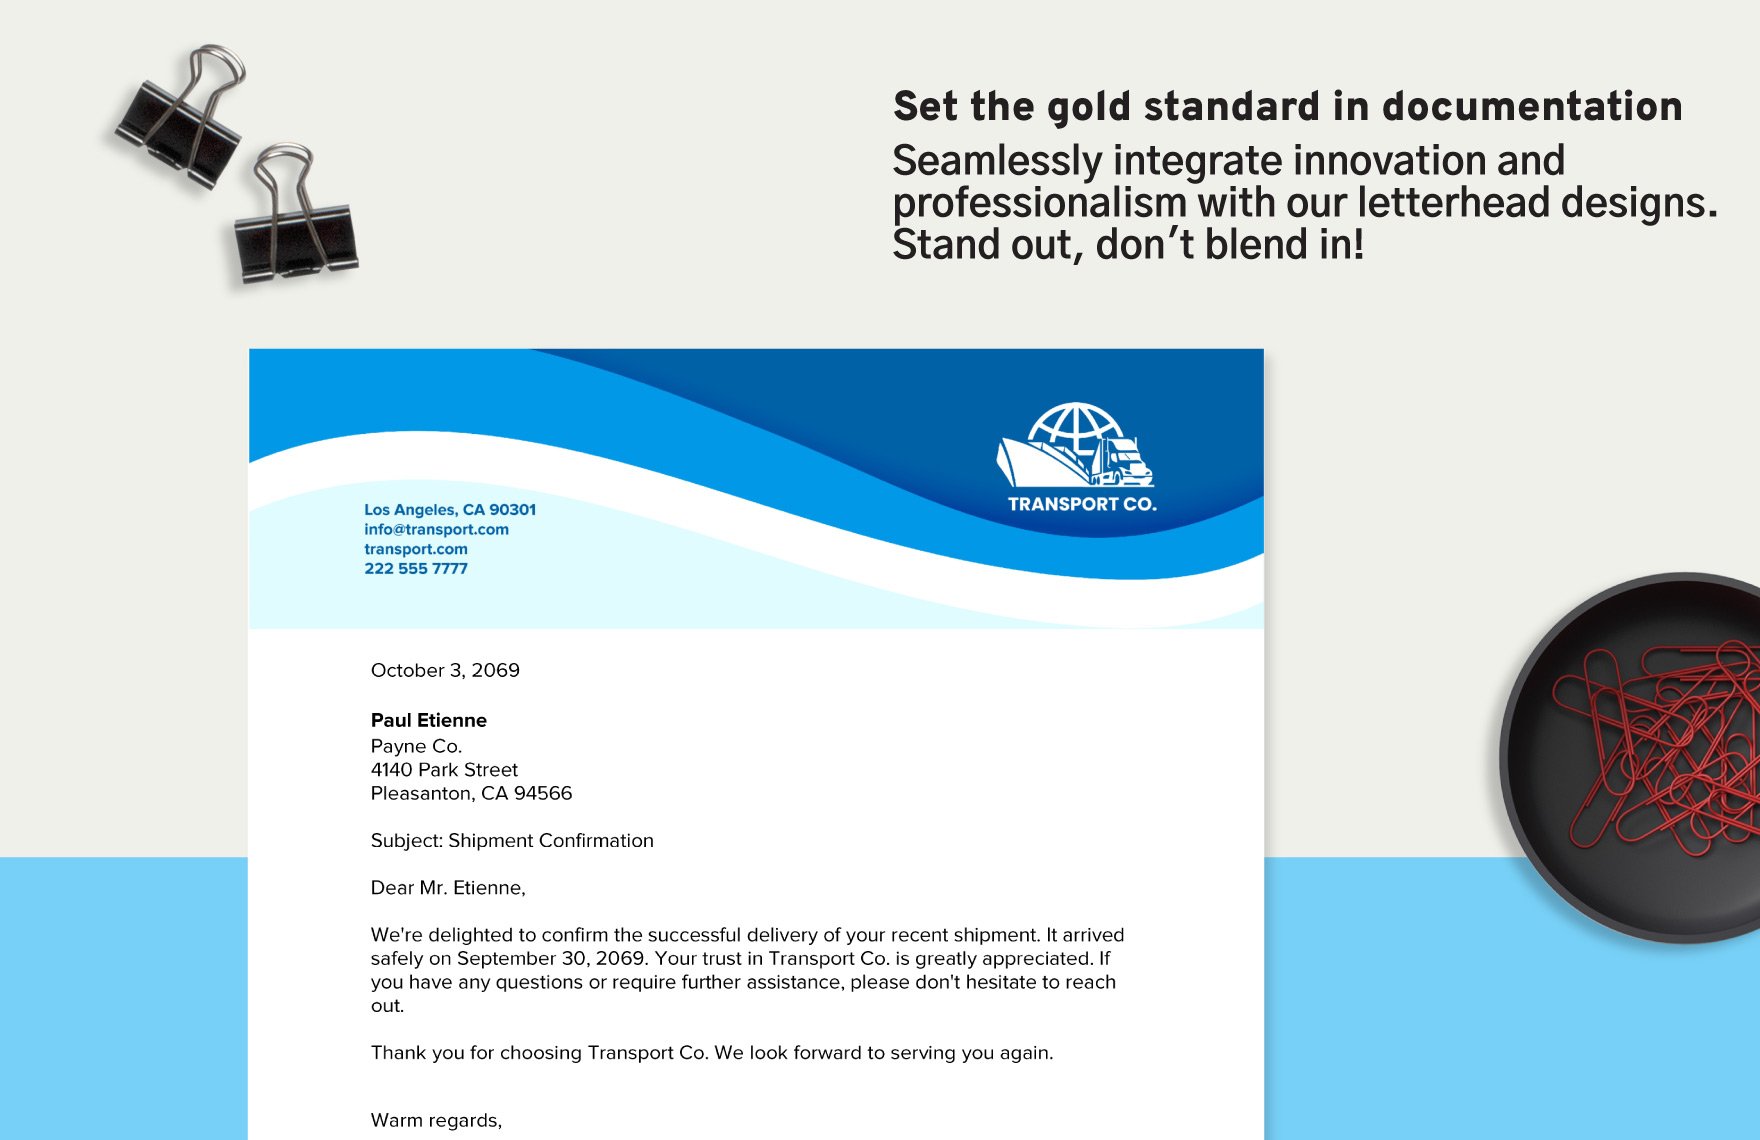 Transport and Logistics Freight Forwarding Company Letterhead Template